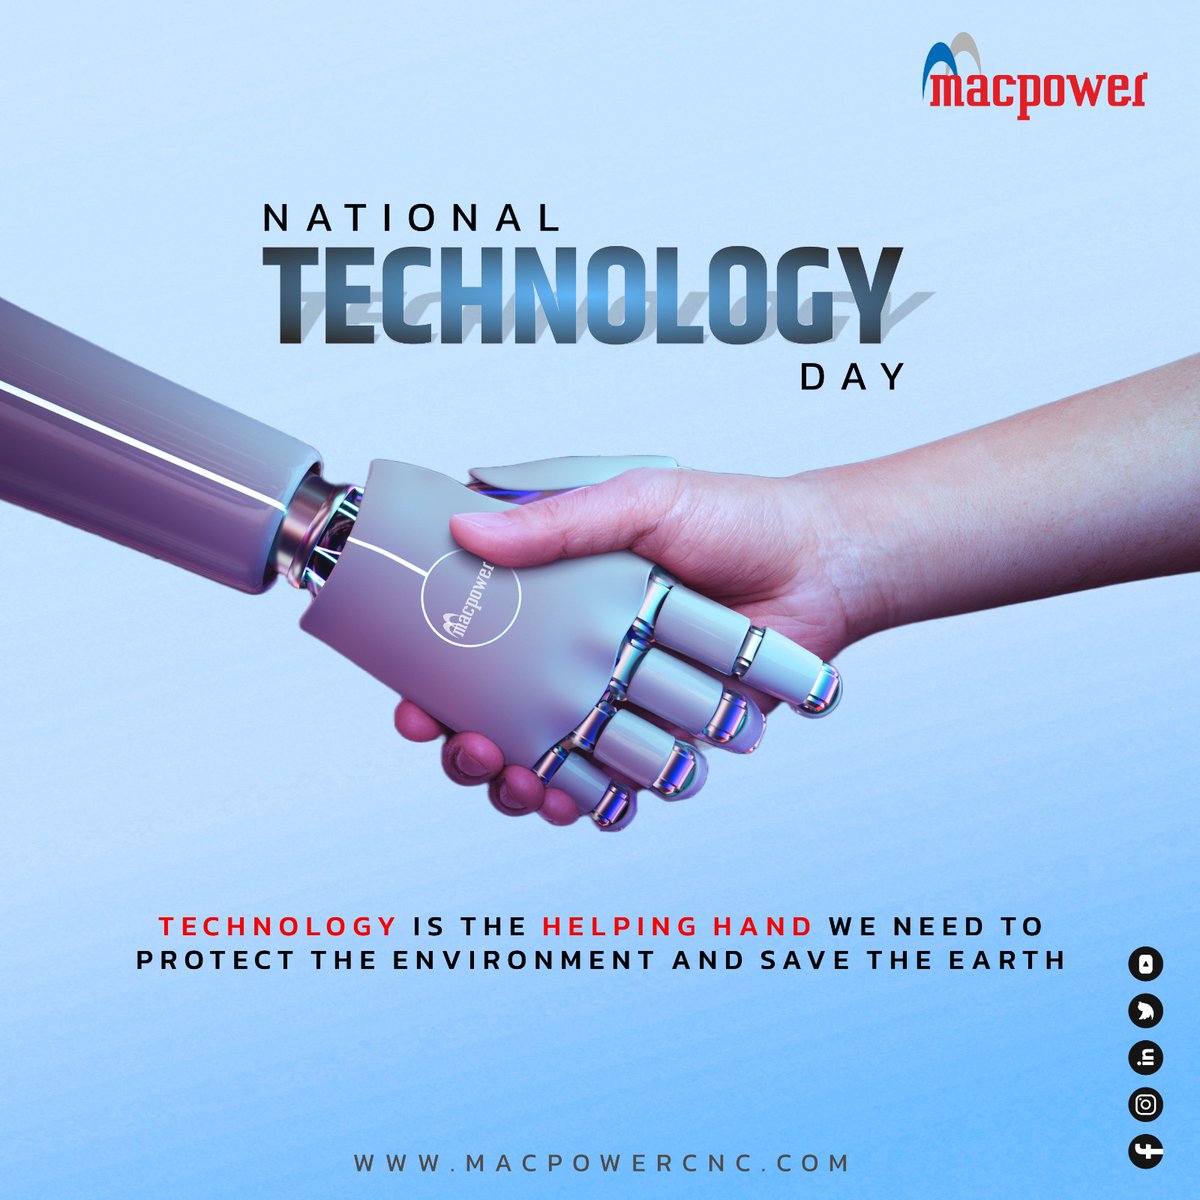 Technology is the Helping Hand We need to Protect the Environment and save the Earth..!!! National Technology Day...!!!
#gujarat #machine #VMC #MACHINETOOLS #indiamart #tooling #cnc #technology #macpower #technologysolutions